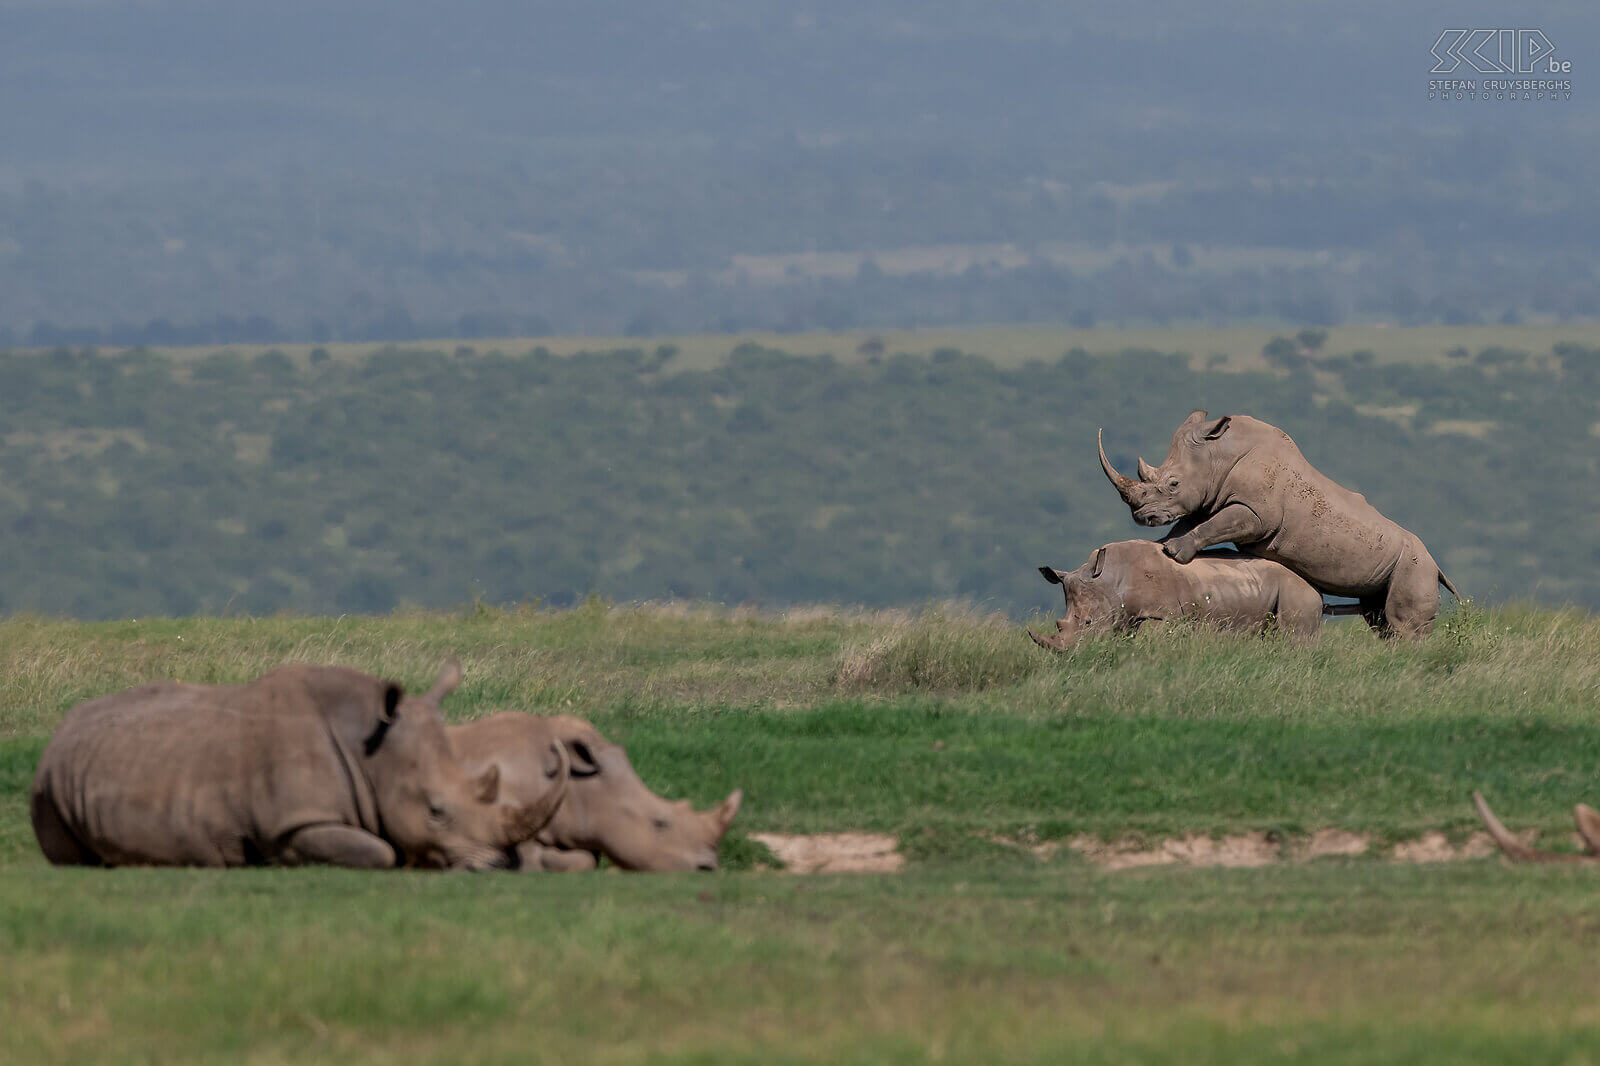 Solio - Mating white rhinos In Solio we were also able to spot mating white rhinos. Very impressive to see these impressive animals in action. Stefan Cruysberghs